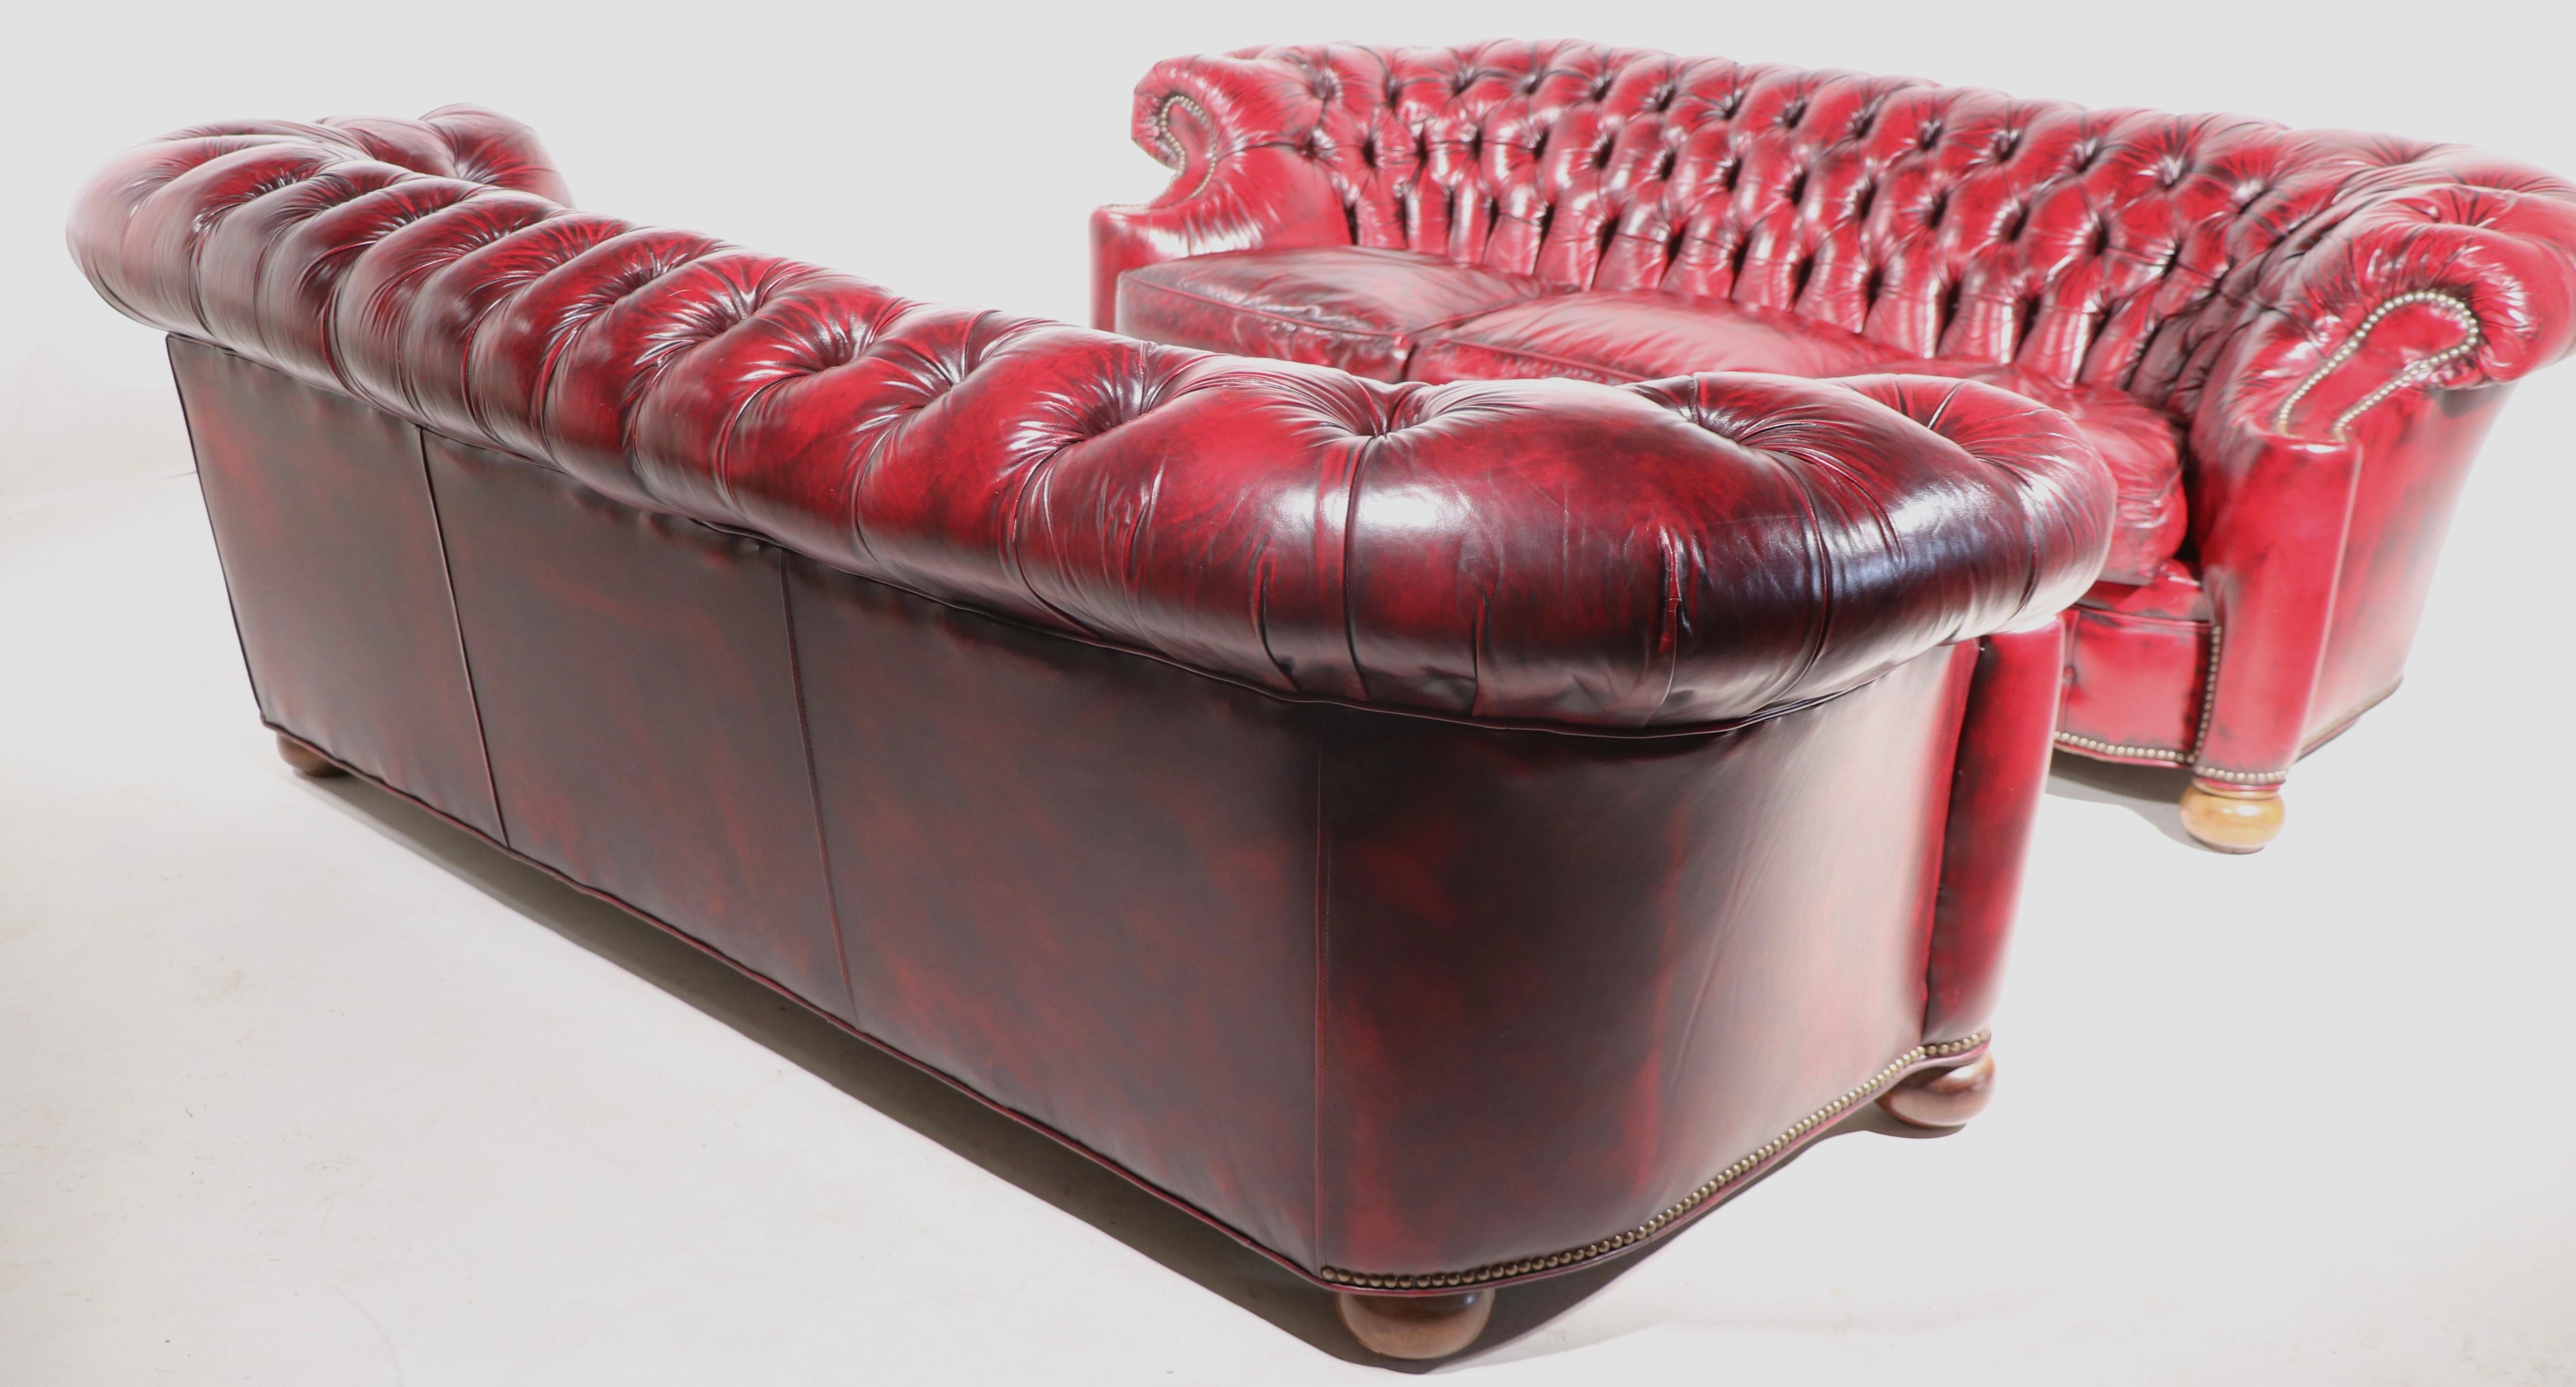 Pr. C Shape Tufted Leather Chesterfield Sofas 4